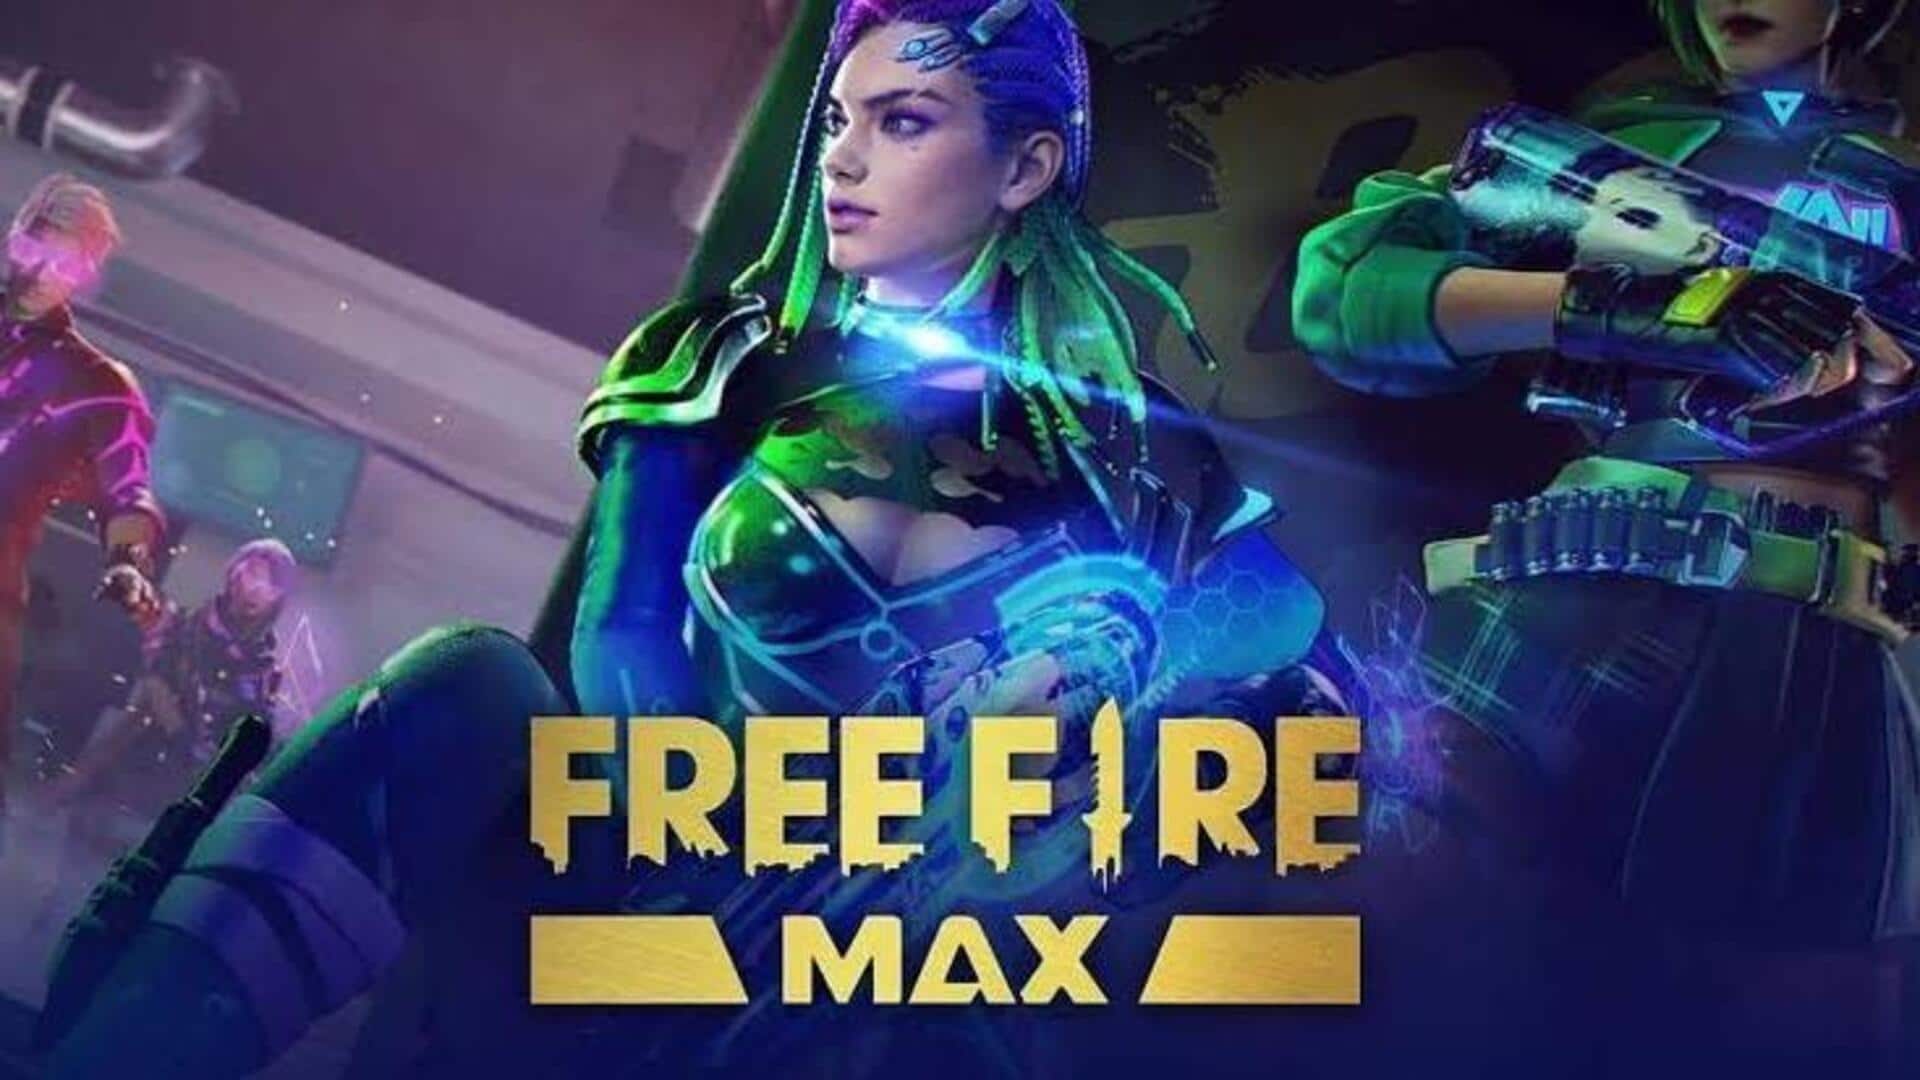 Garena Free Fire MAX introduces redeem codes for April 16